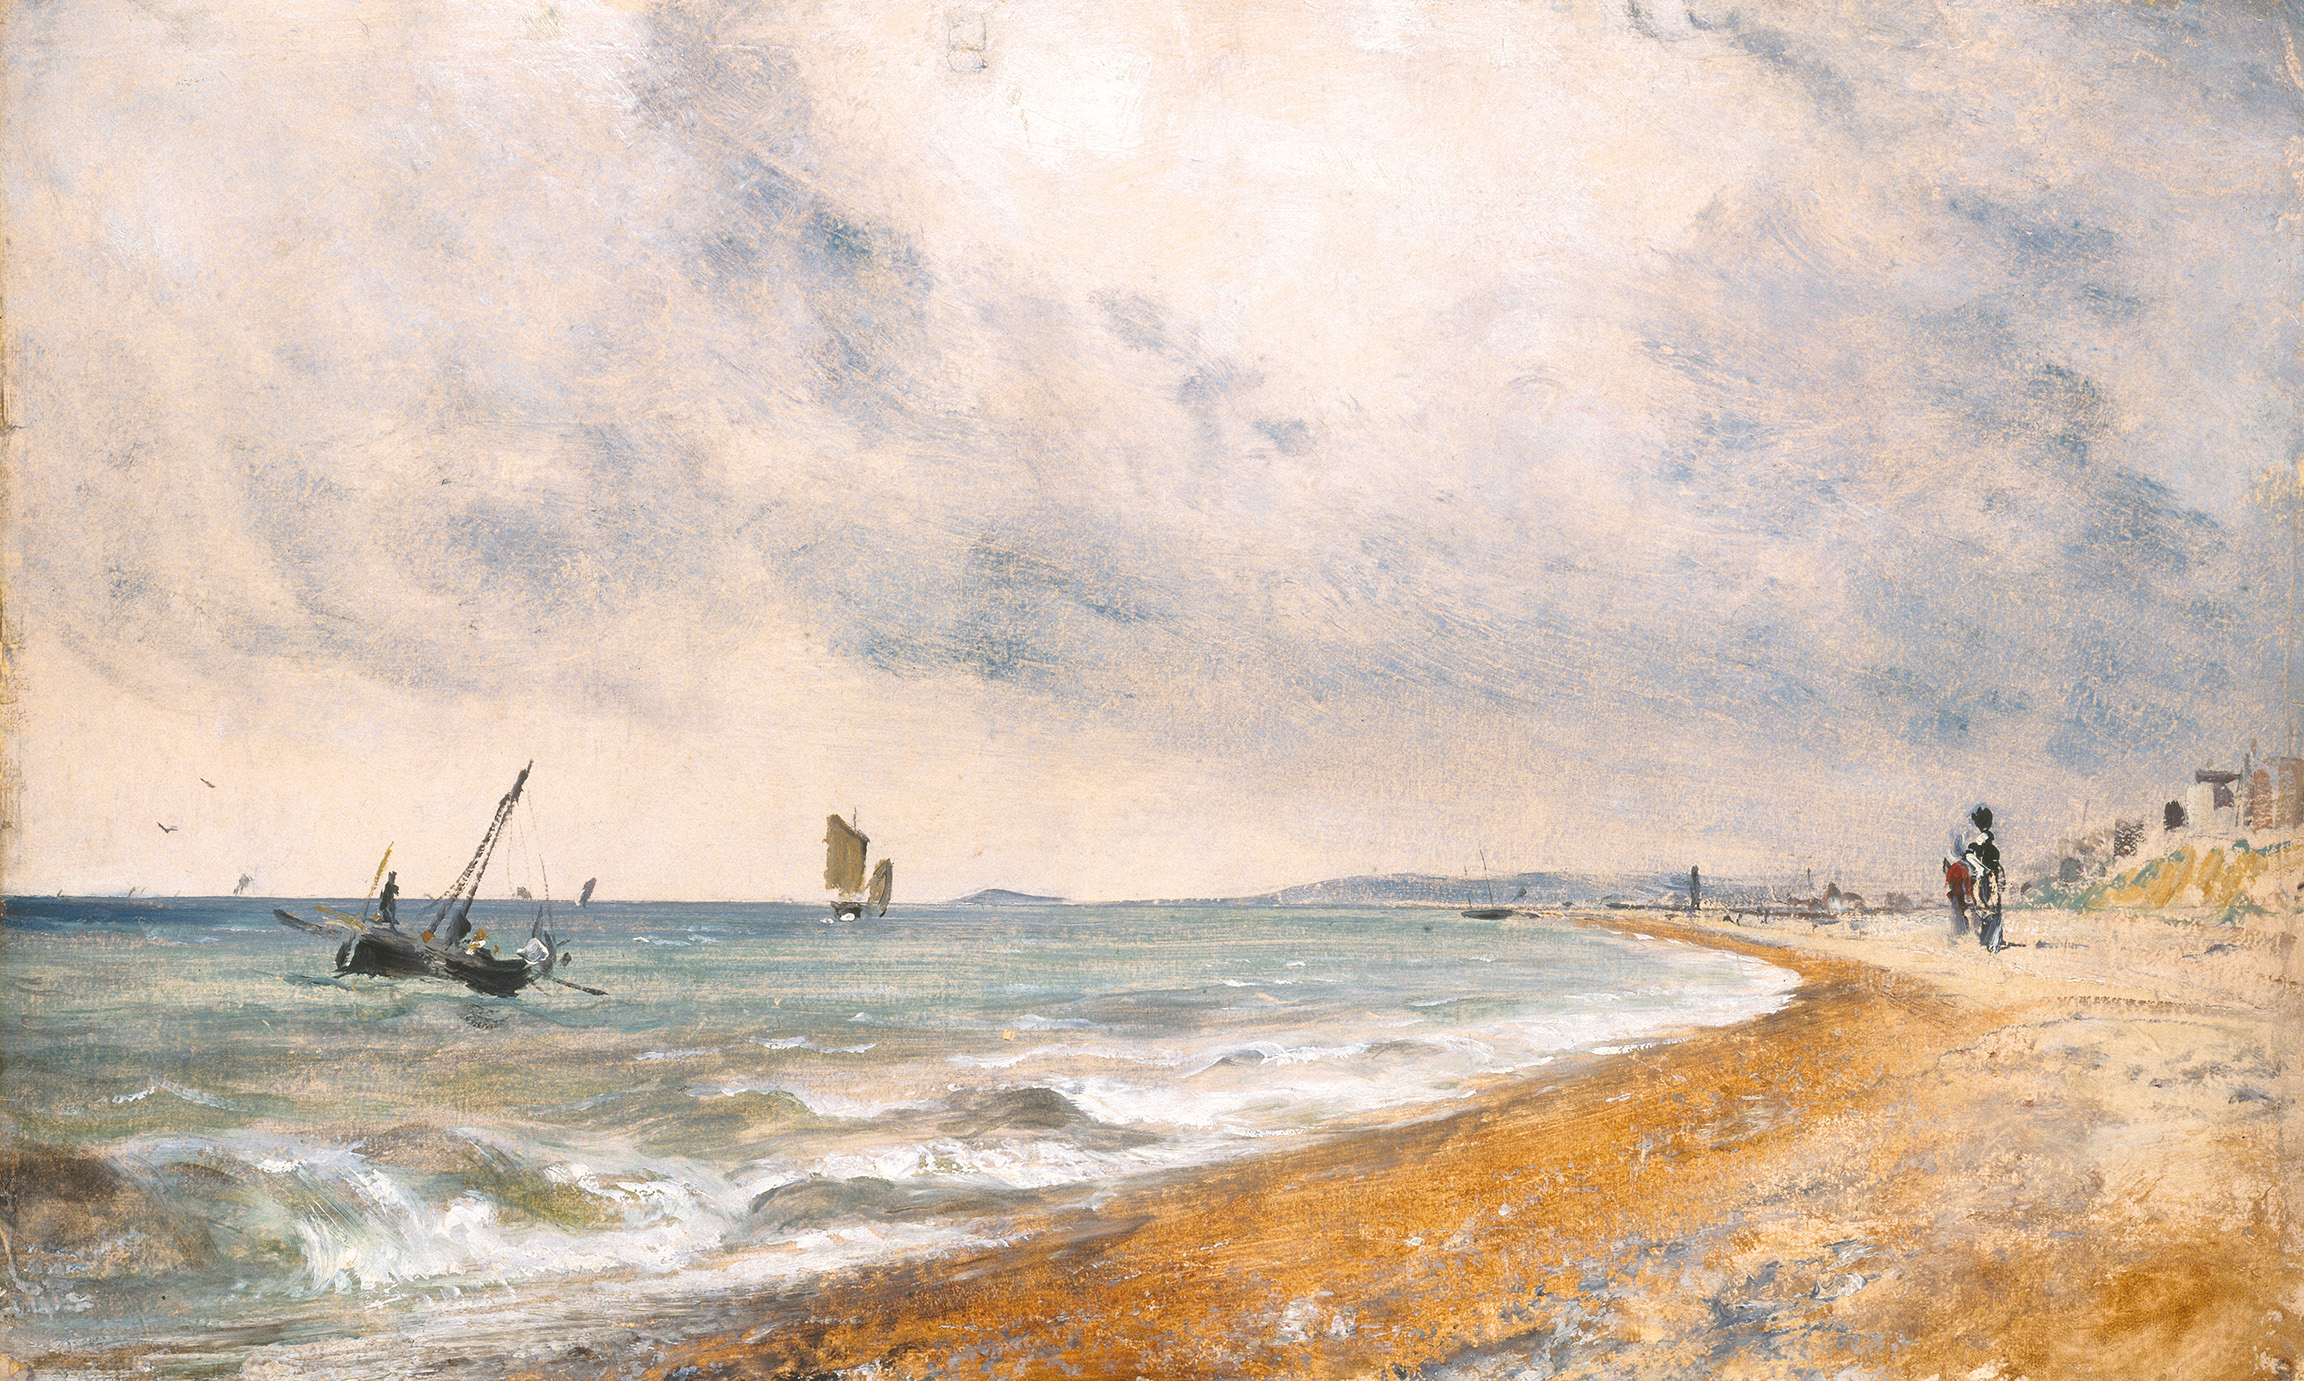 Hove Beach, with Fishing Boats